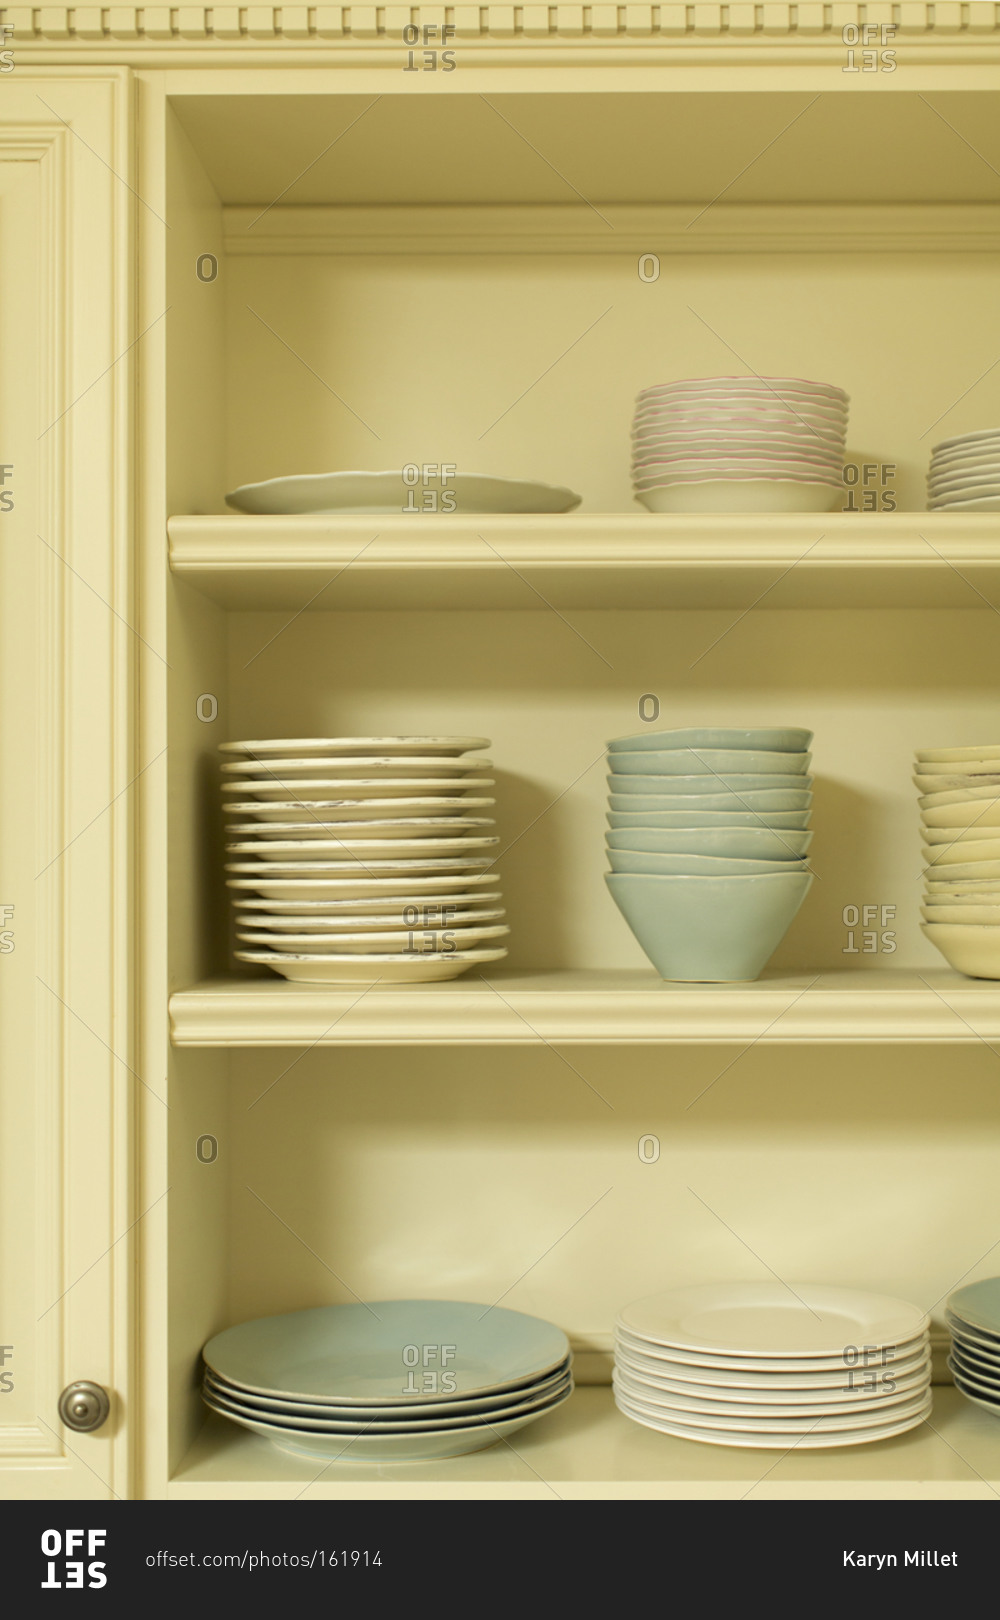 Dishes in a cupboard